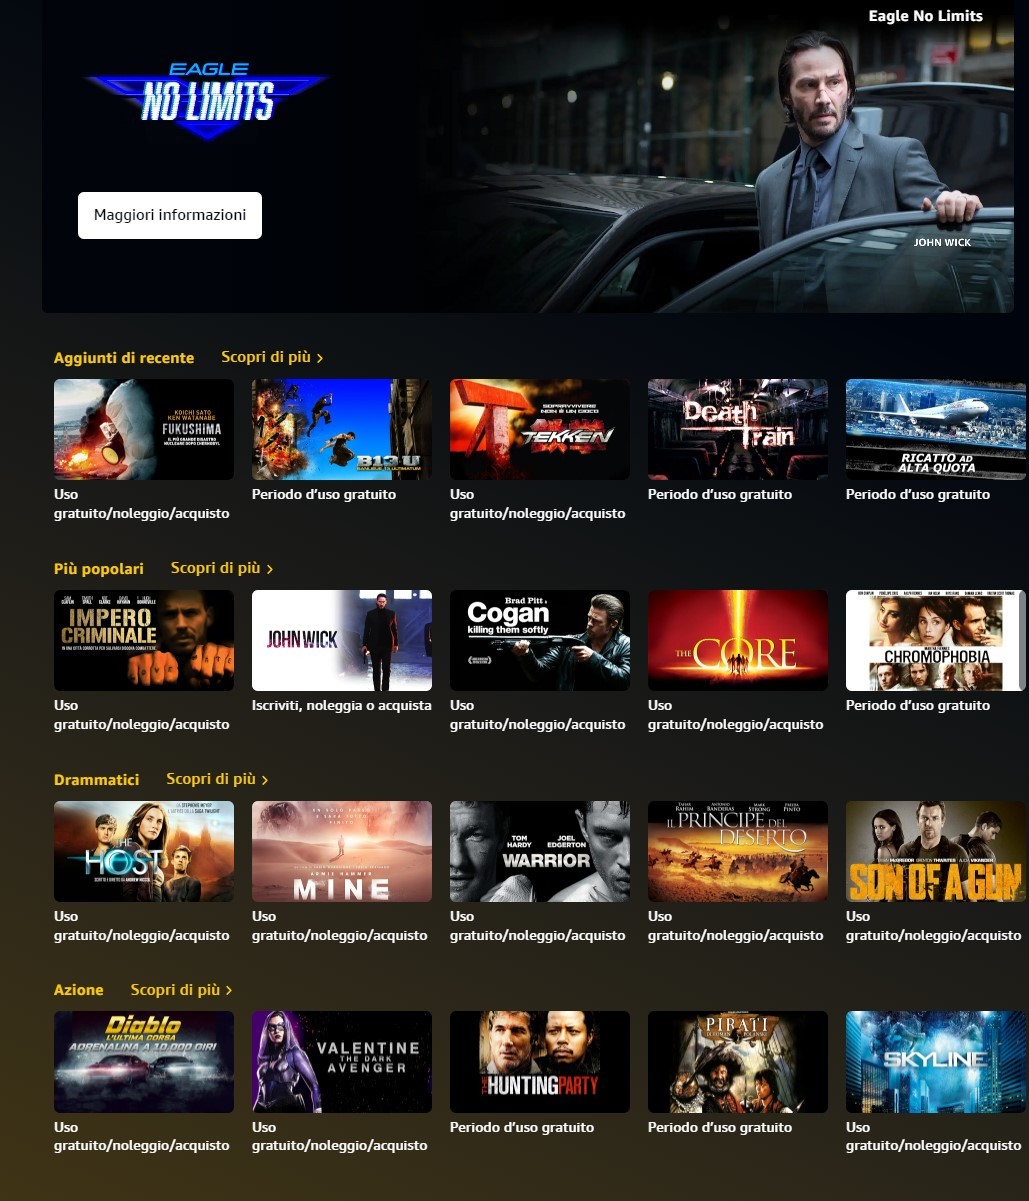 The new EAGLE PICTURES channel dedicated to the best action, thriller and suspense films has arrived on PRIME VIDEO